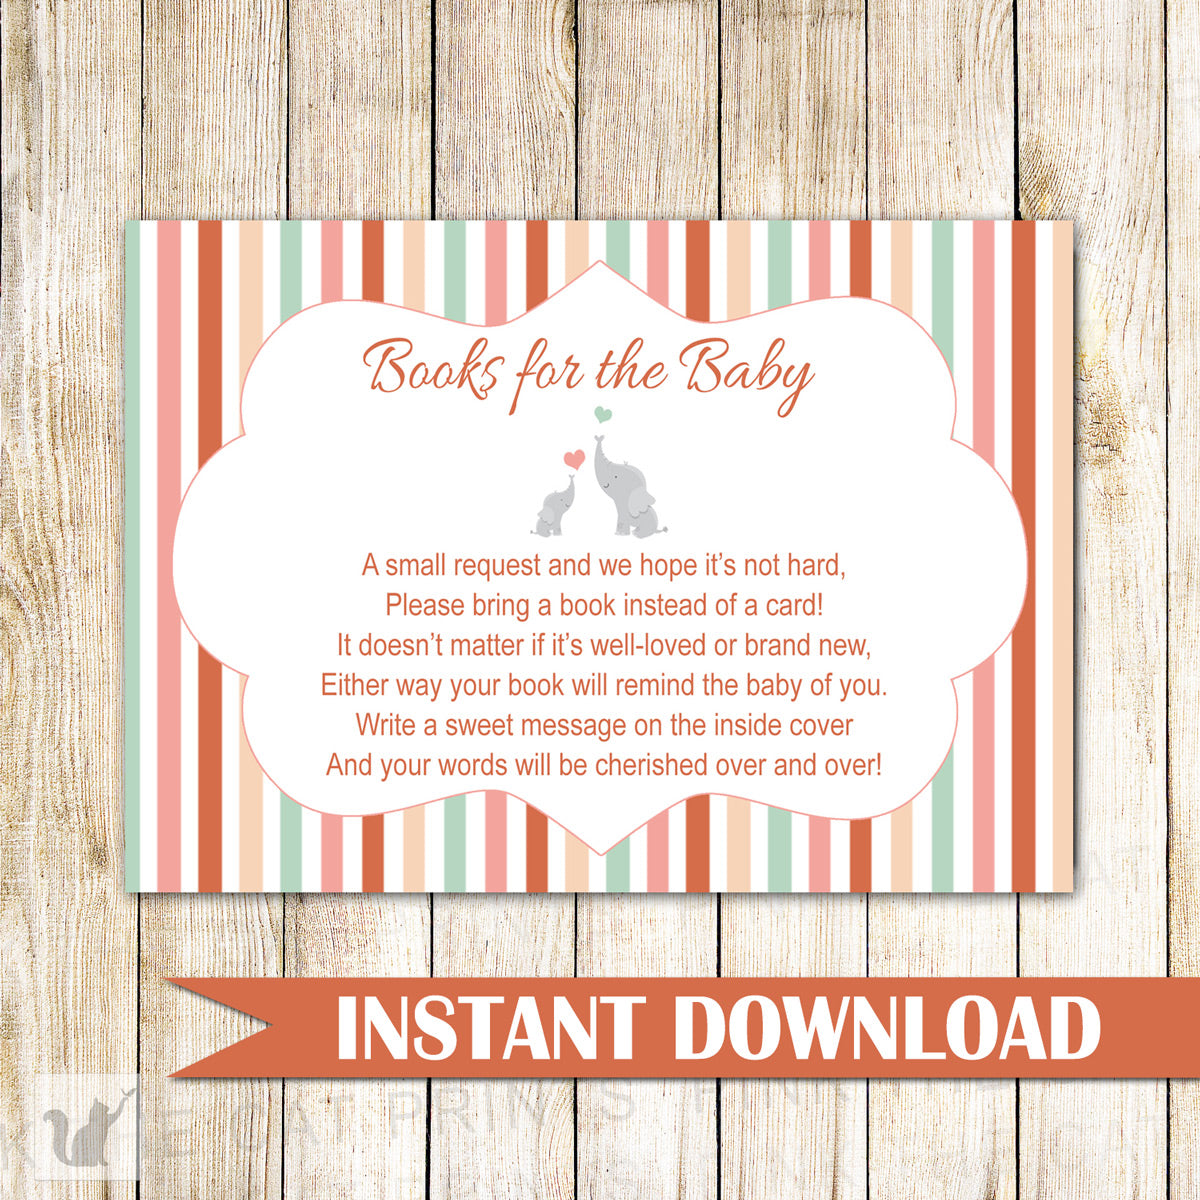 bring-a-book-instead-of-a-card-elephant-baby-shower-orange-printable